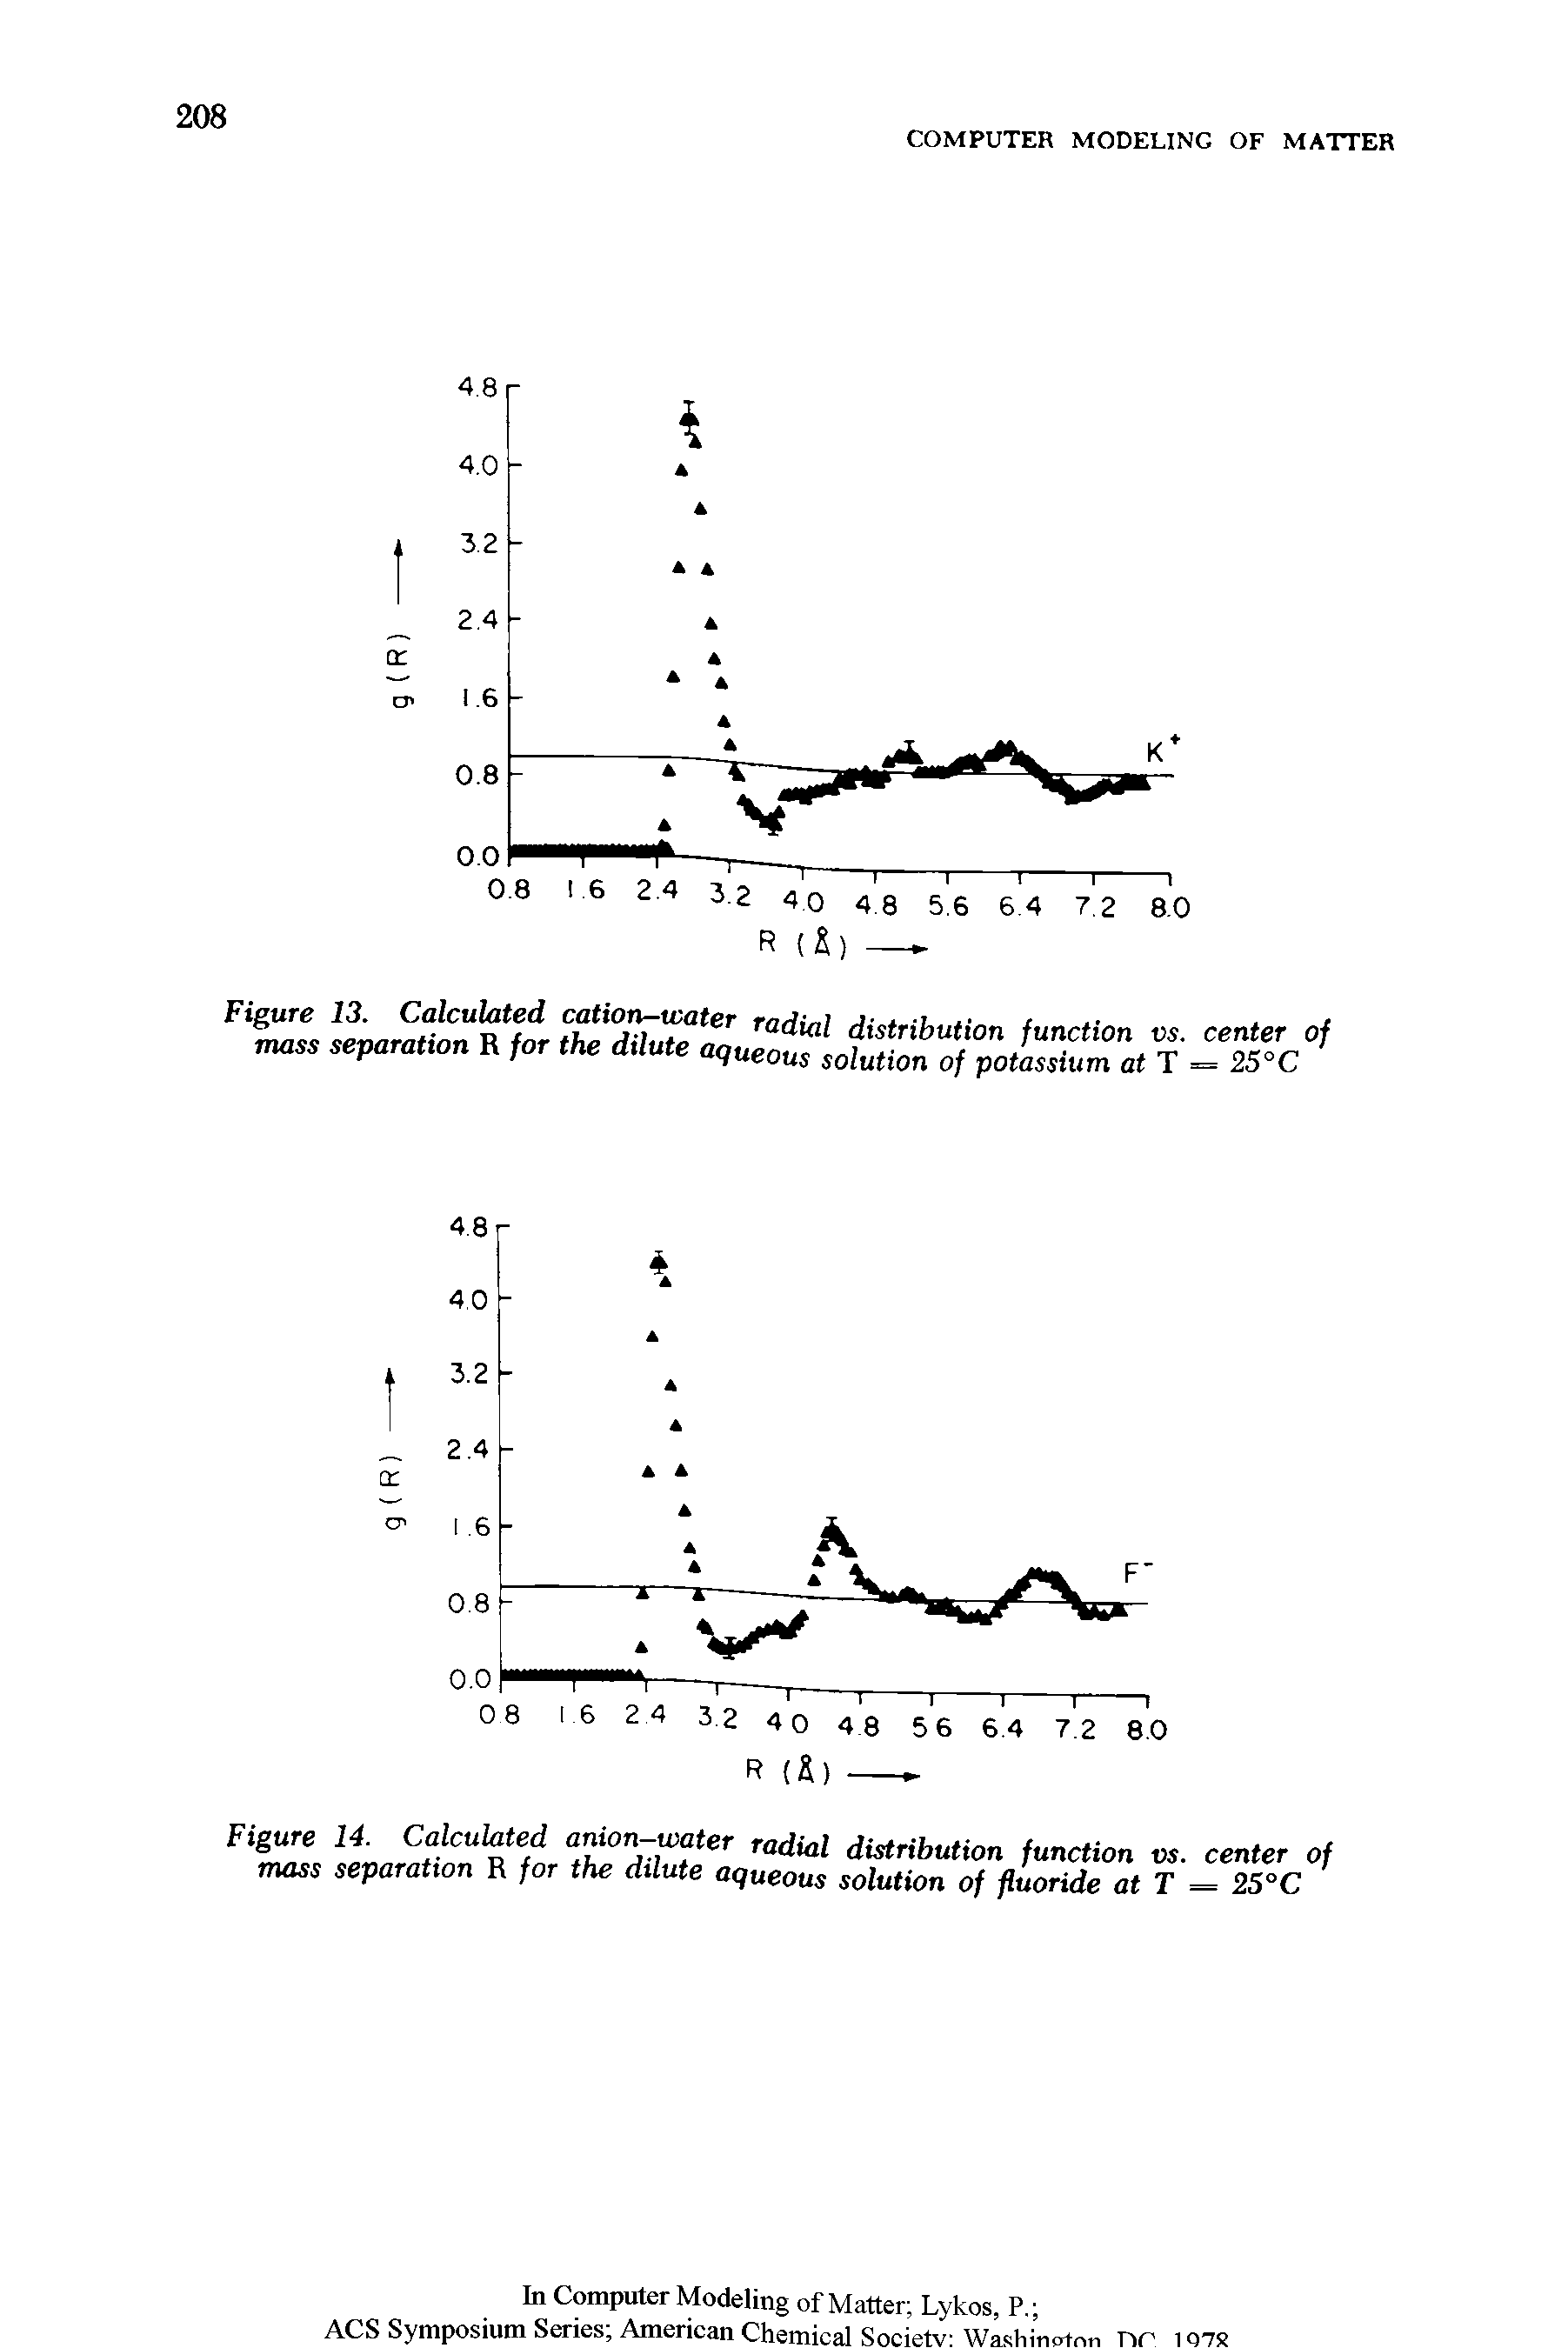 Figure 14. Calculated anion-water radial distribution function vs. center of mass separation R for the dilute aqueous solution of fluoride at T = 25°C...